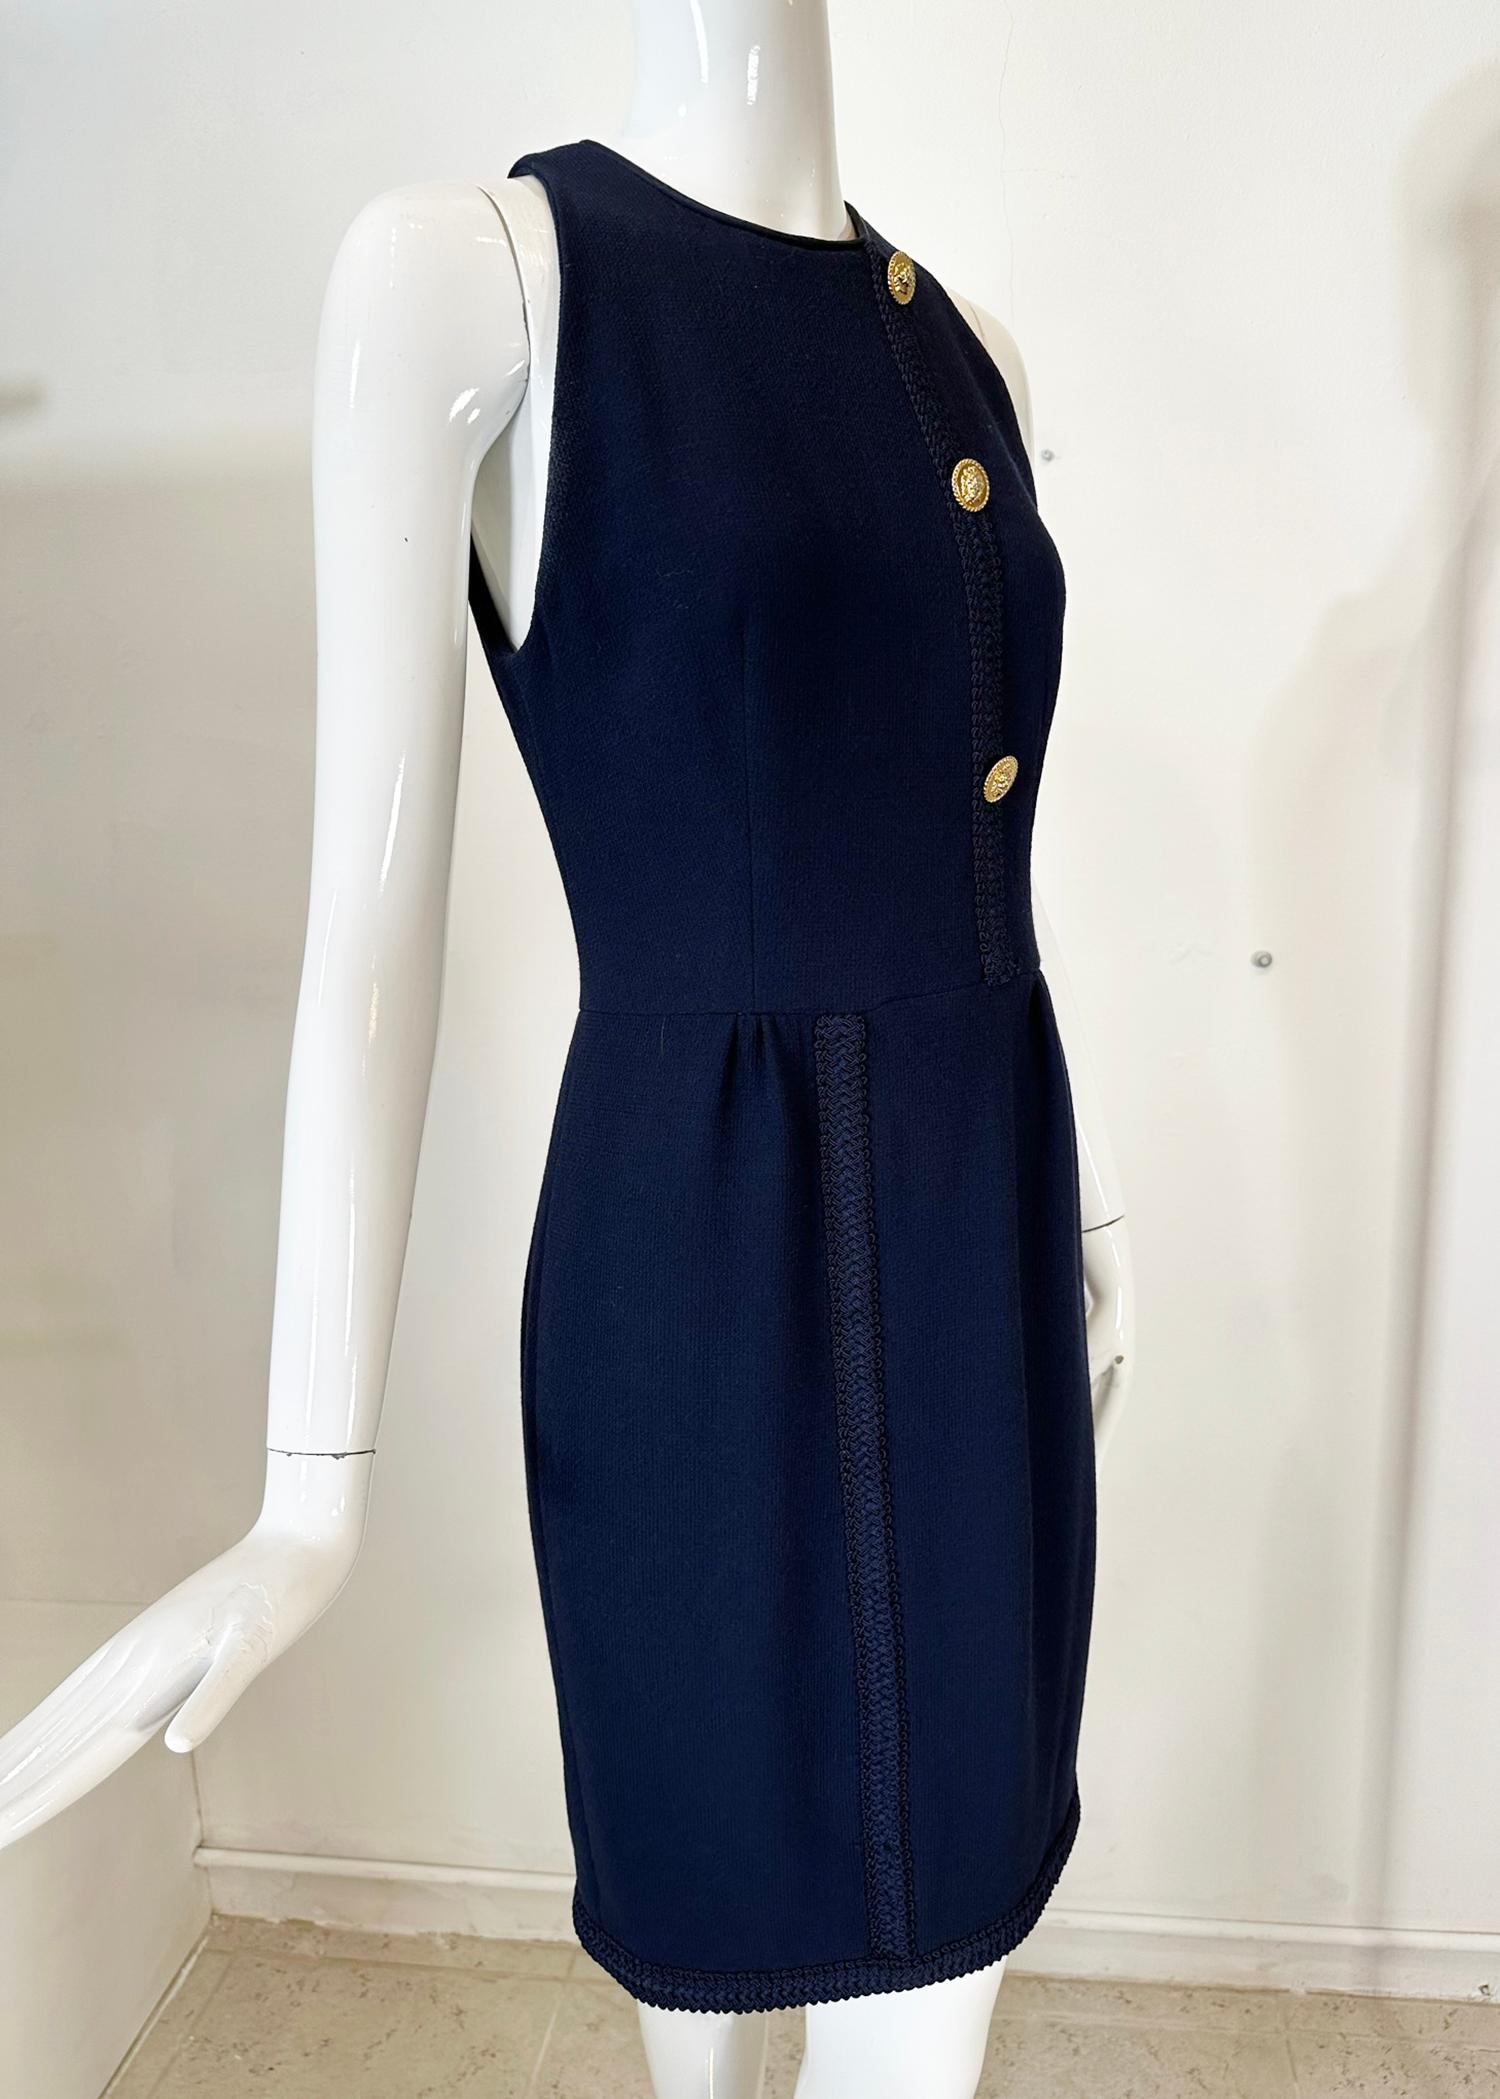 Irene Galitzine Couture Navy Blue Racer Neck Fitted Sheath Braid Trim Dress 1960 For Sale 3